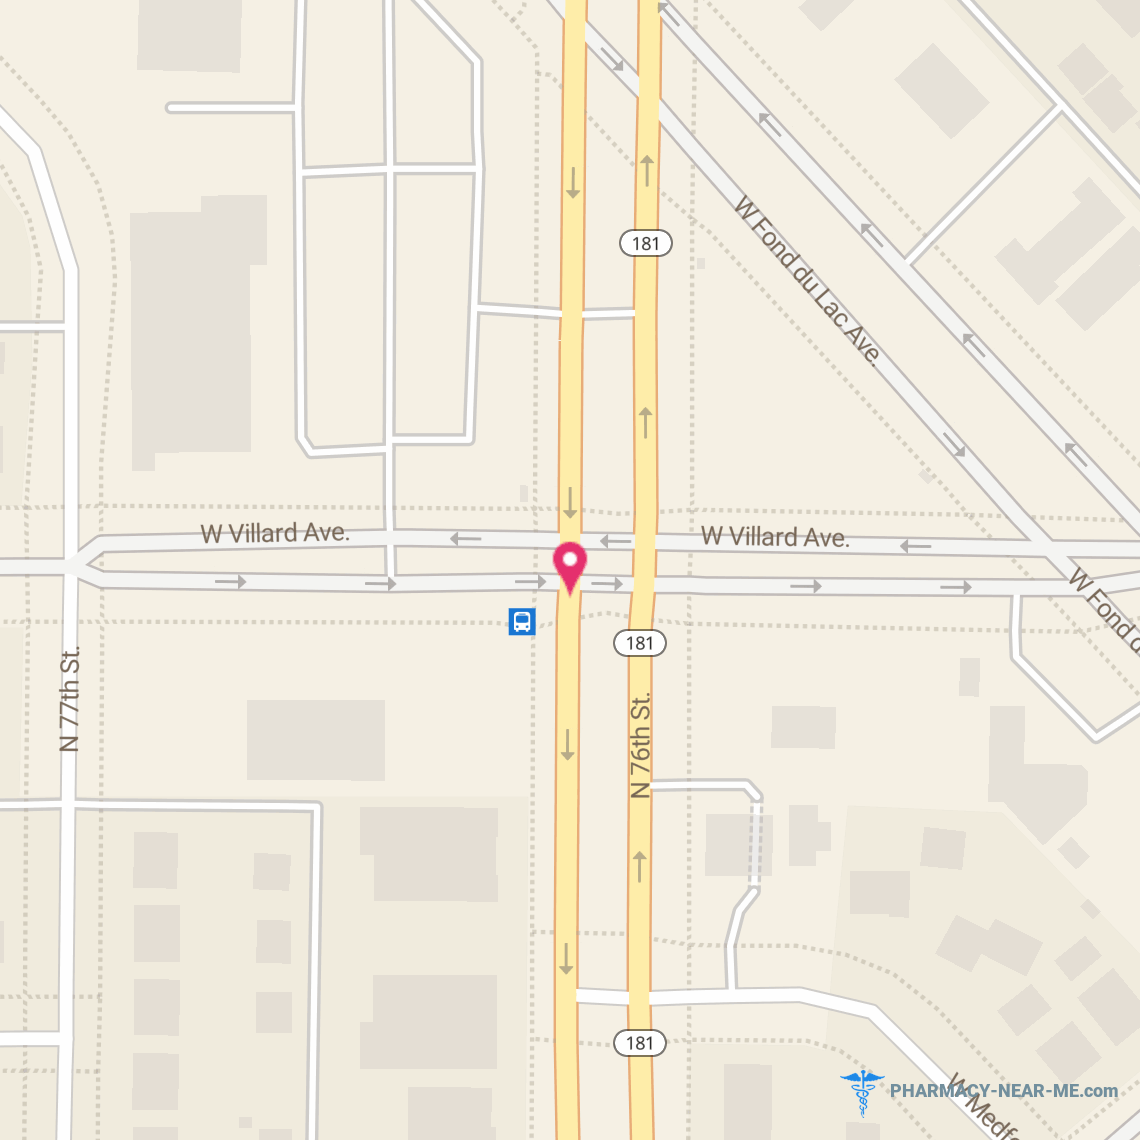 Walgreens #04254 - Pharmacy Open Hours, Phone, Reviews & Information: 5201 N 91st St, Milwaukee, WI 53225